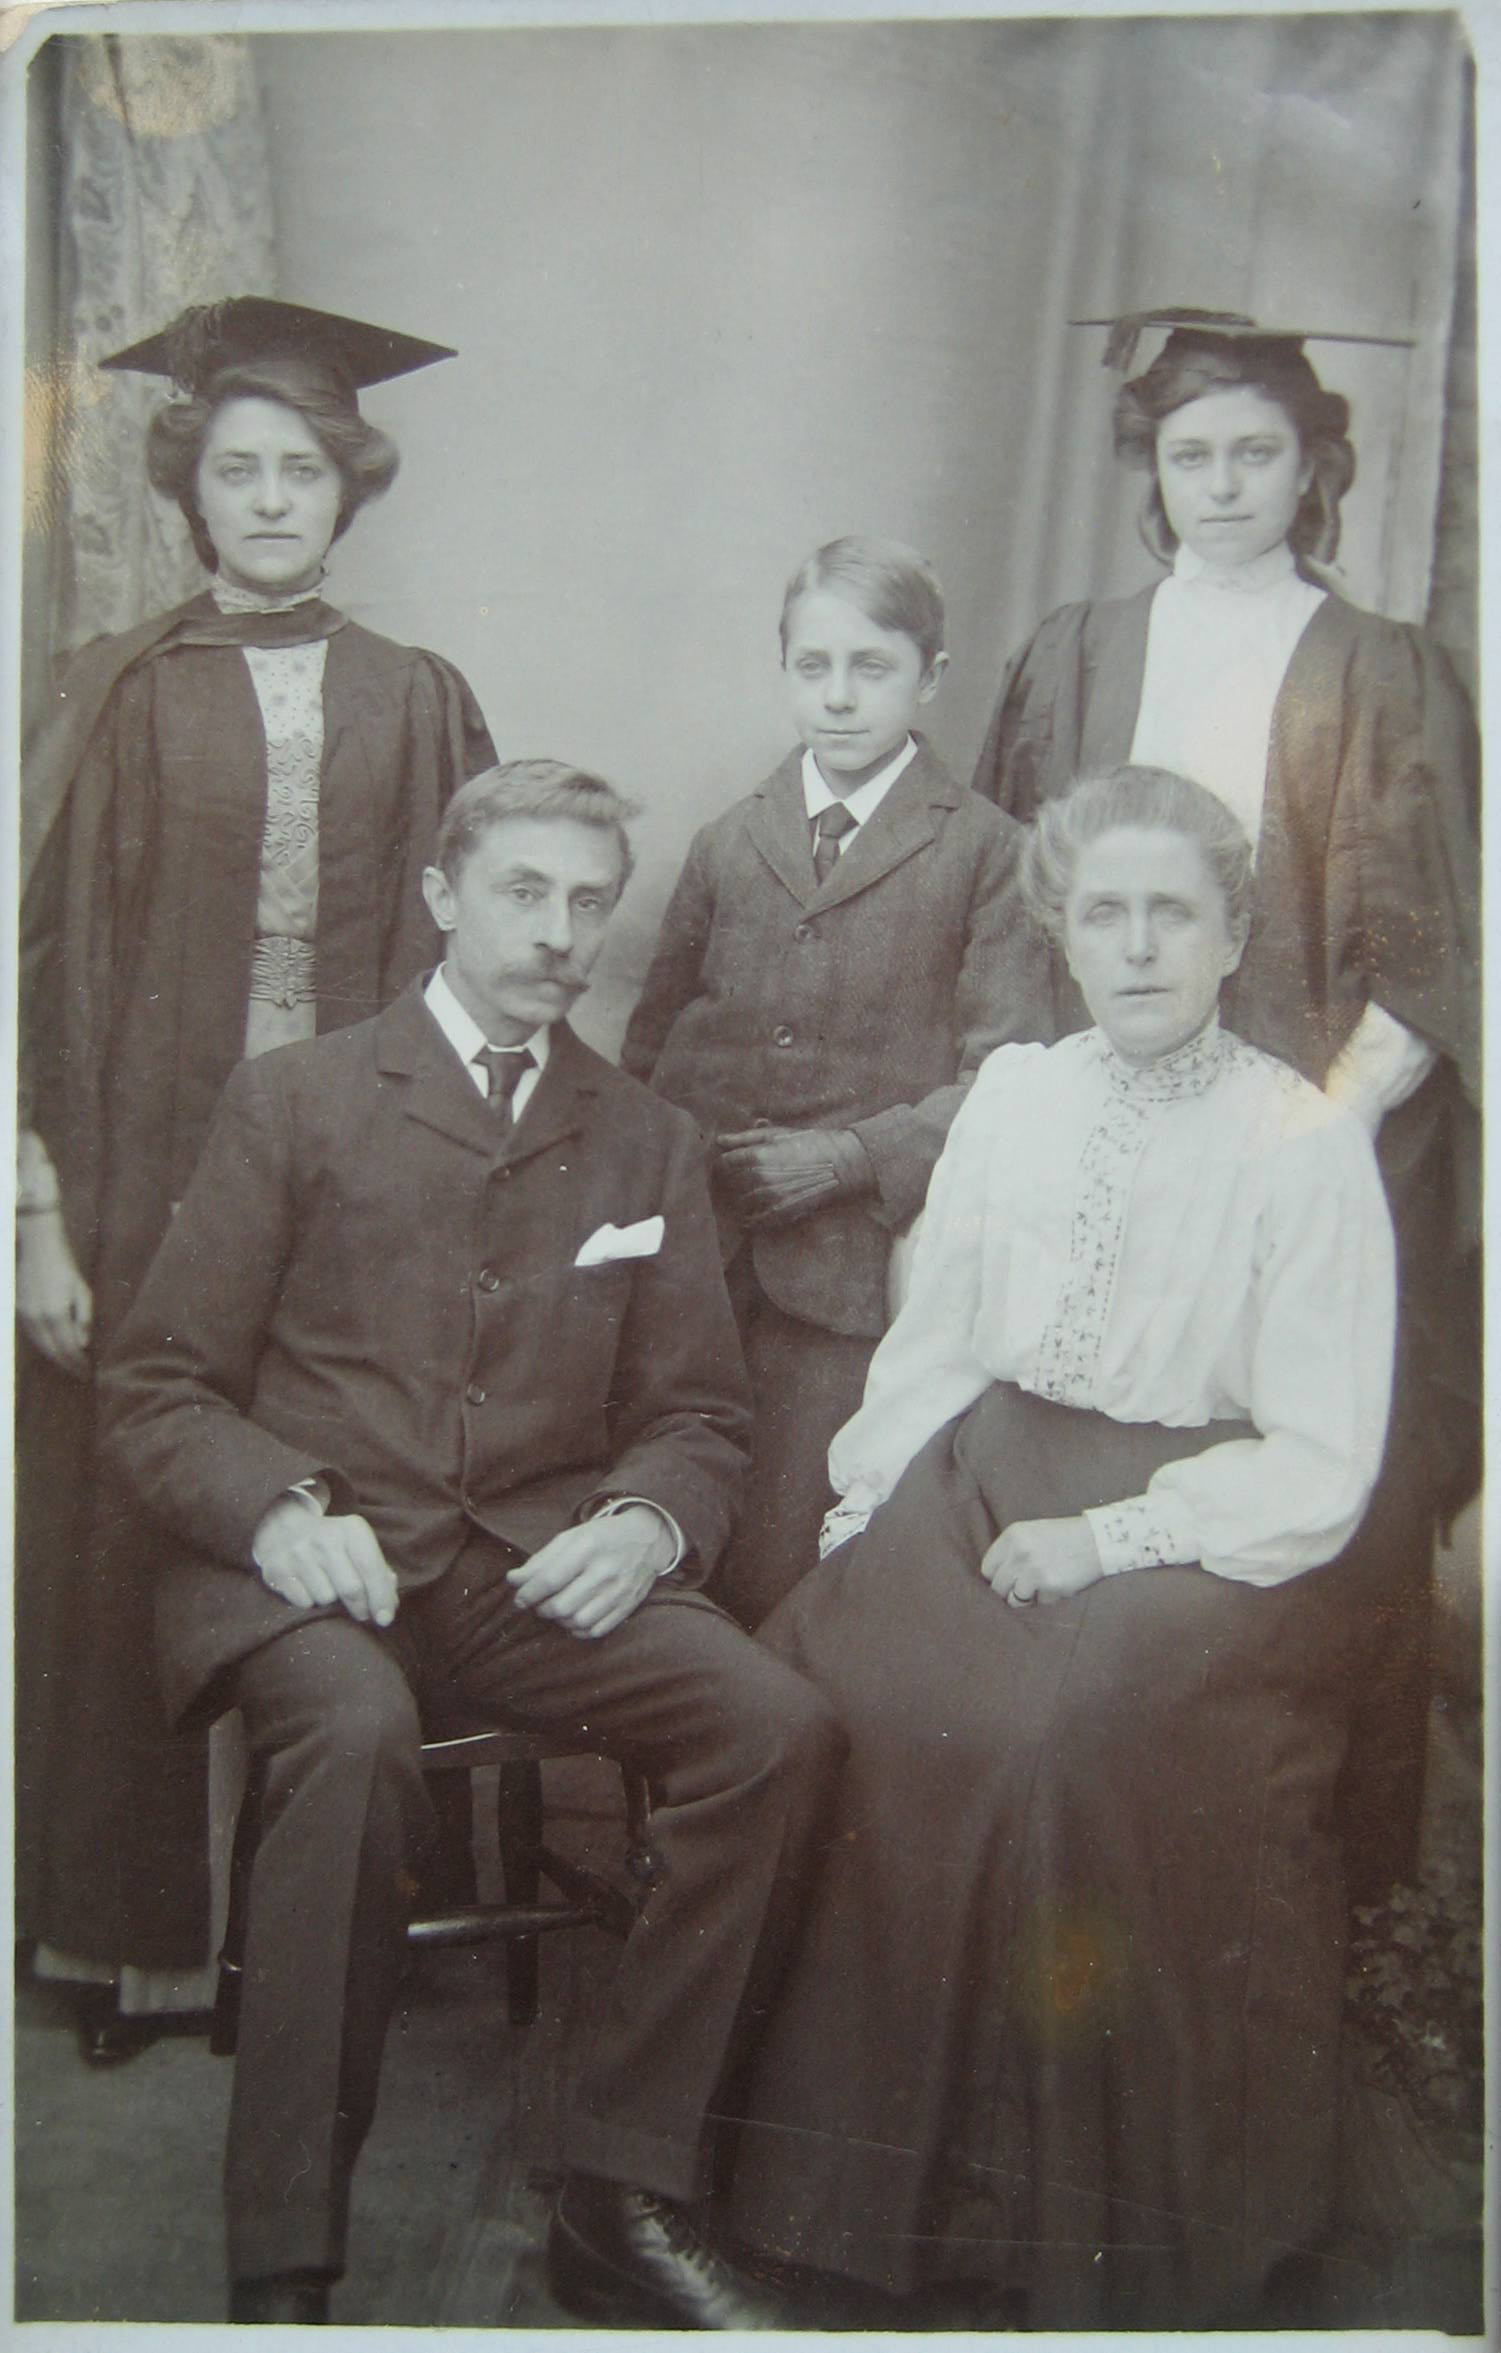 The Webb family in Edwardian times: Alfred and wife Sarah, Ethel, Fred and Elizabeth